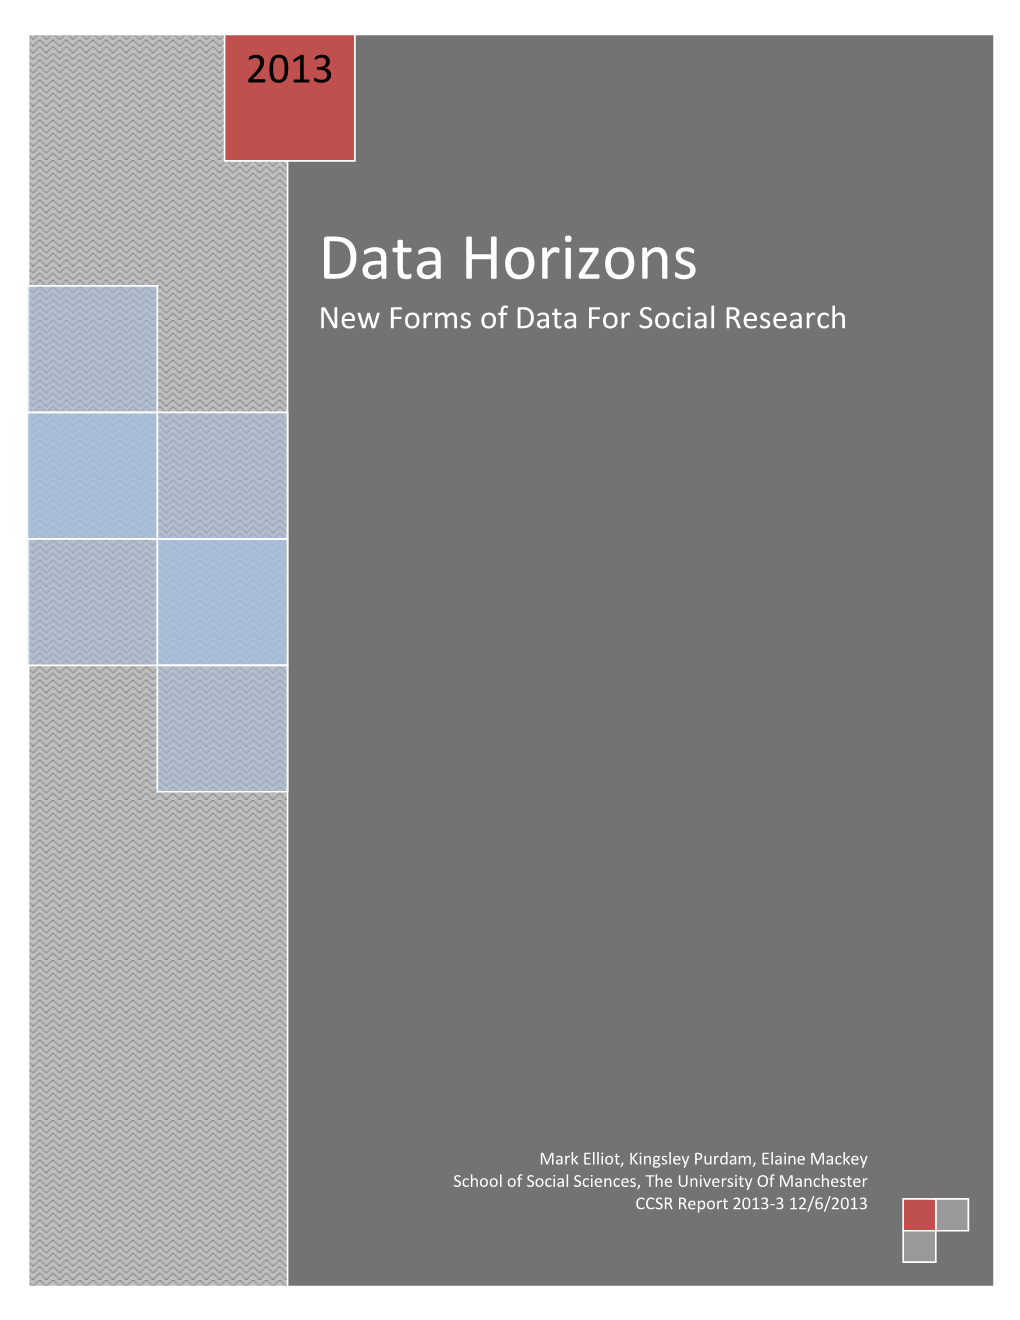 Data Horizons New Forms of Data for Social Research